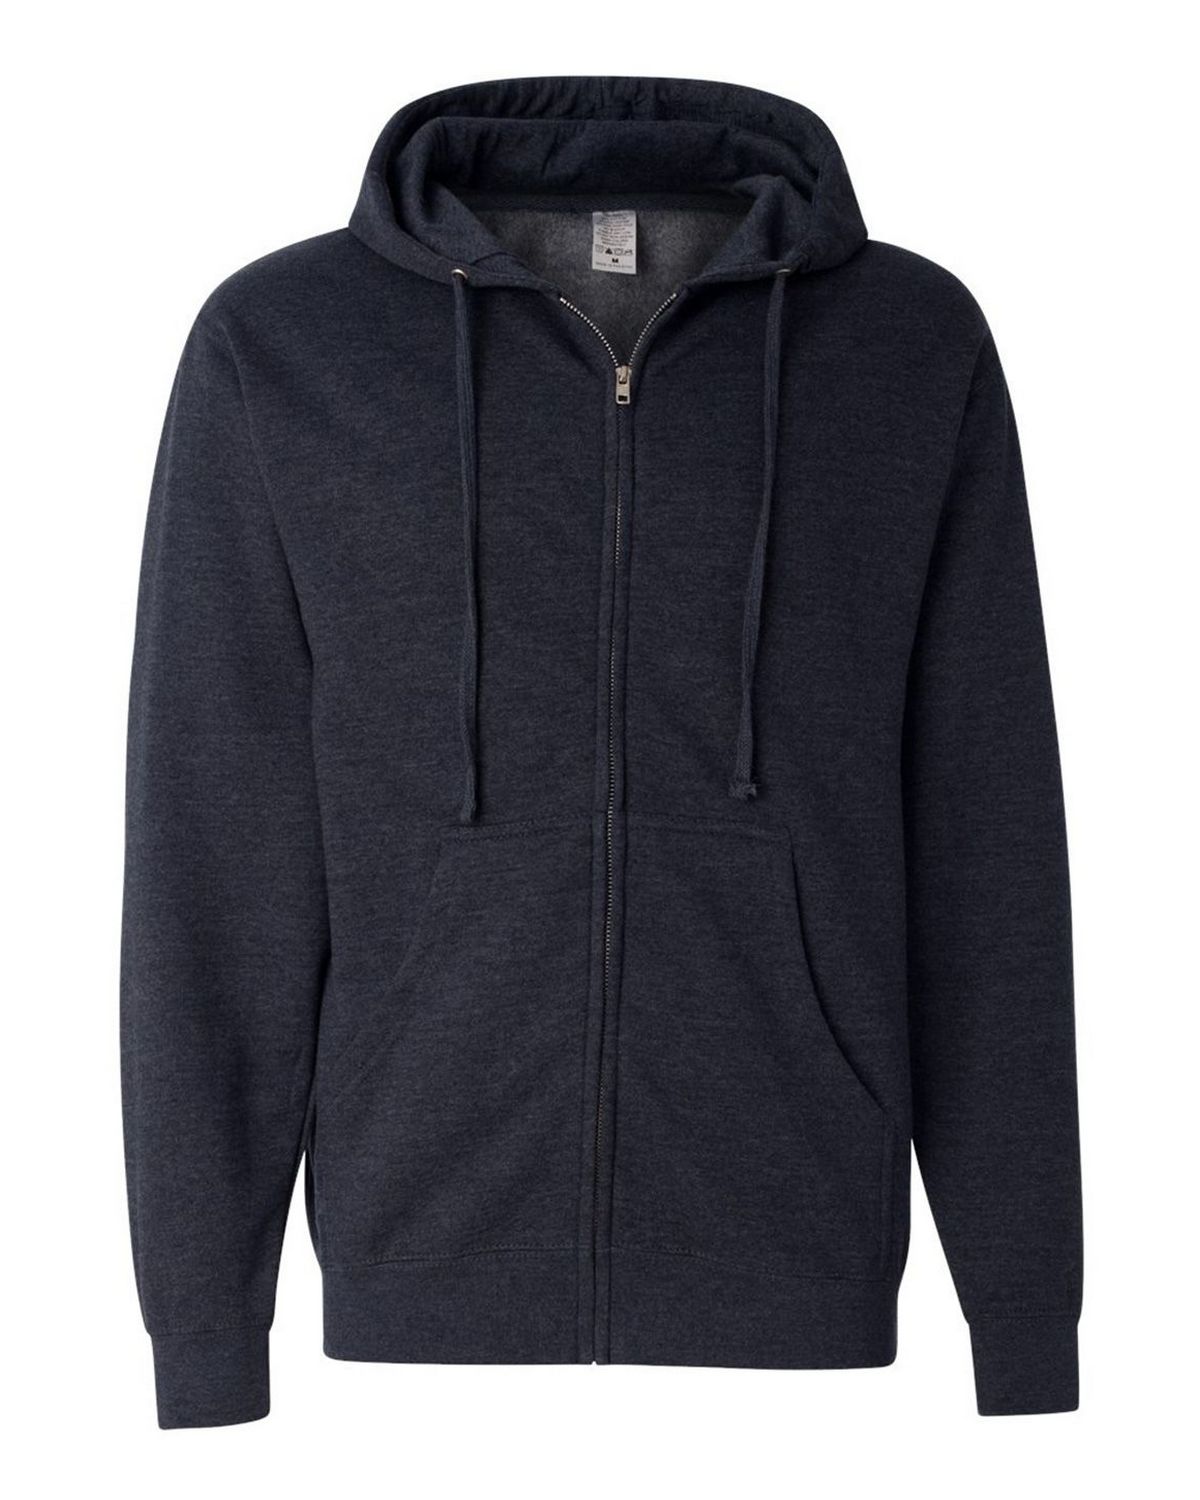 Independent Trading Co. SS4500Z Mens Midweight Hooded Full-Zip Sweatshirt